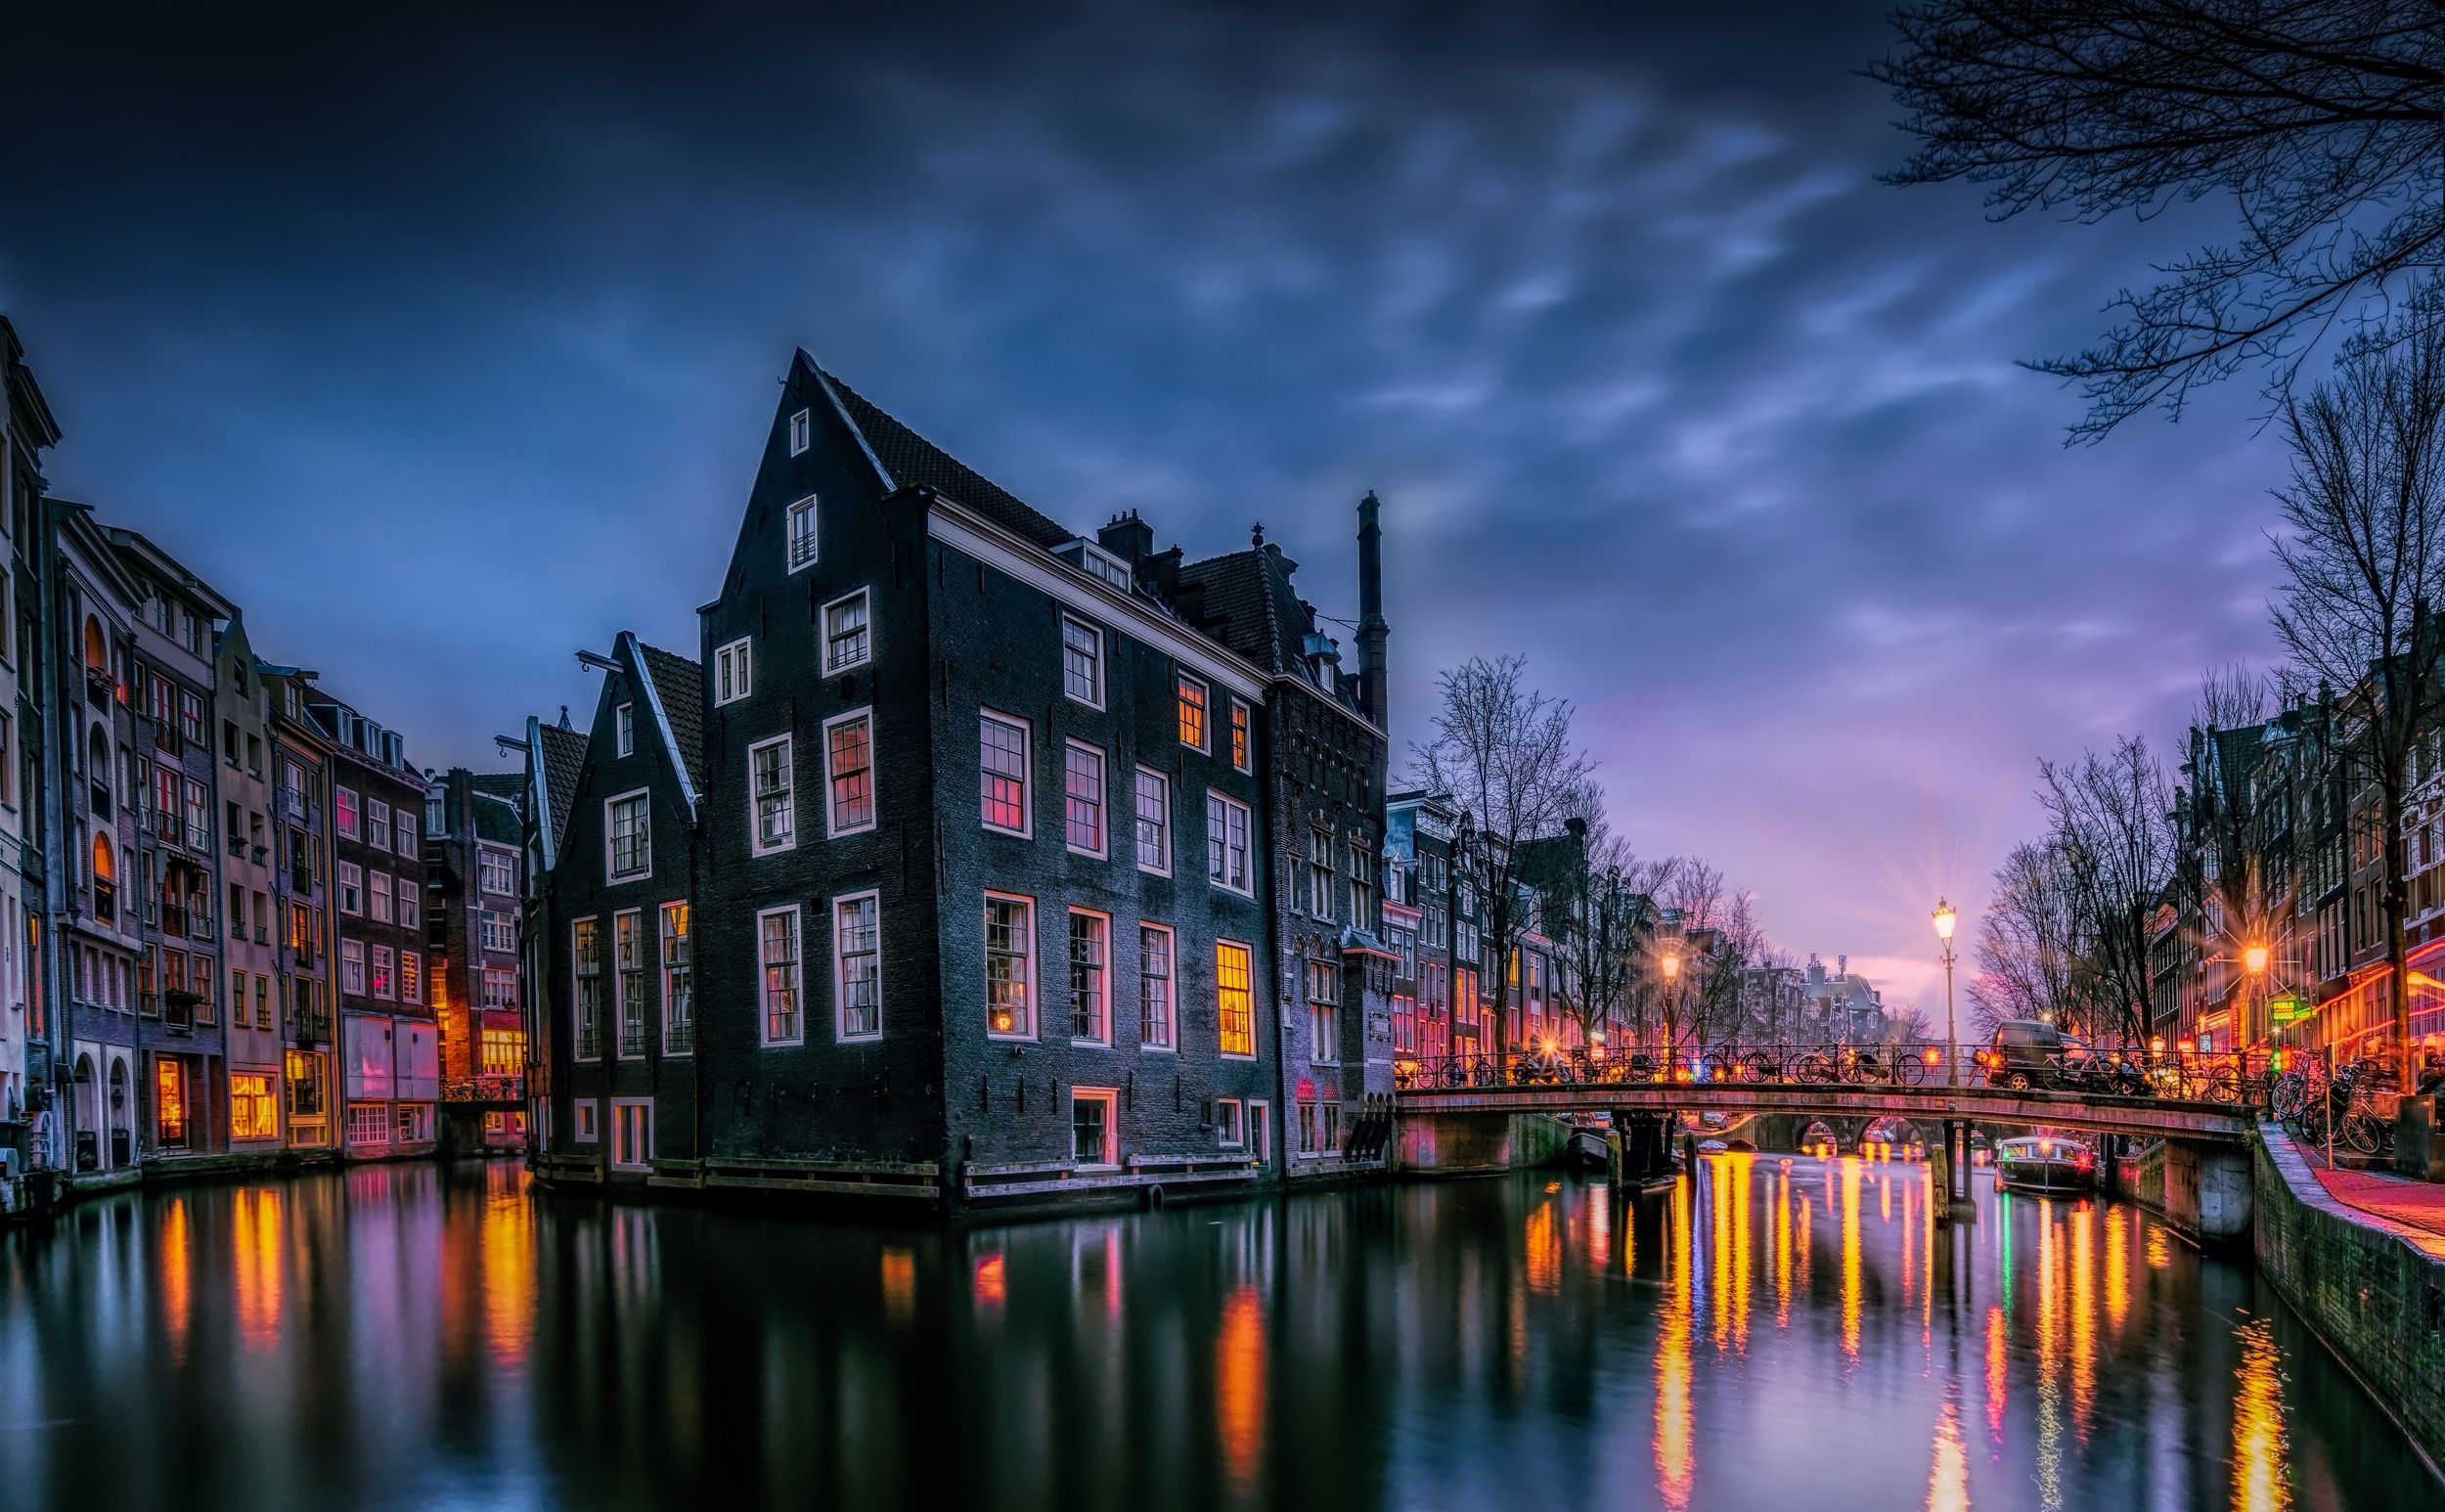  Amsterdam Hintergrundbild 2500x1546. Mobile wallpaper: Cities, Night, City, Light, Netherlands, Amsterdam, Man Made, Canal, 426681 download the picture for free